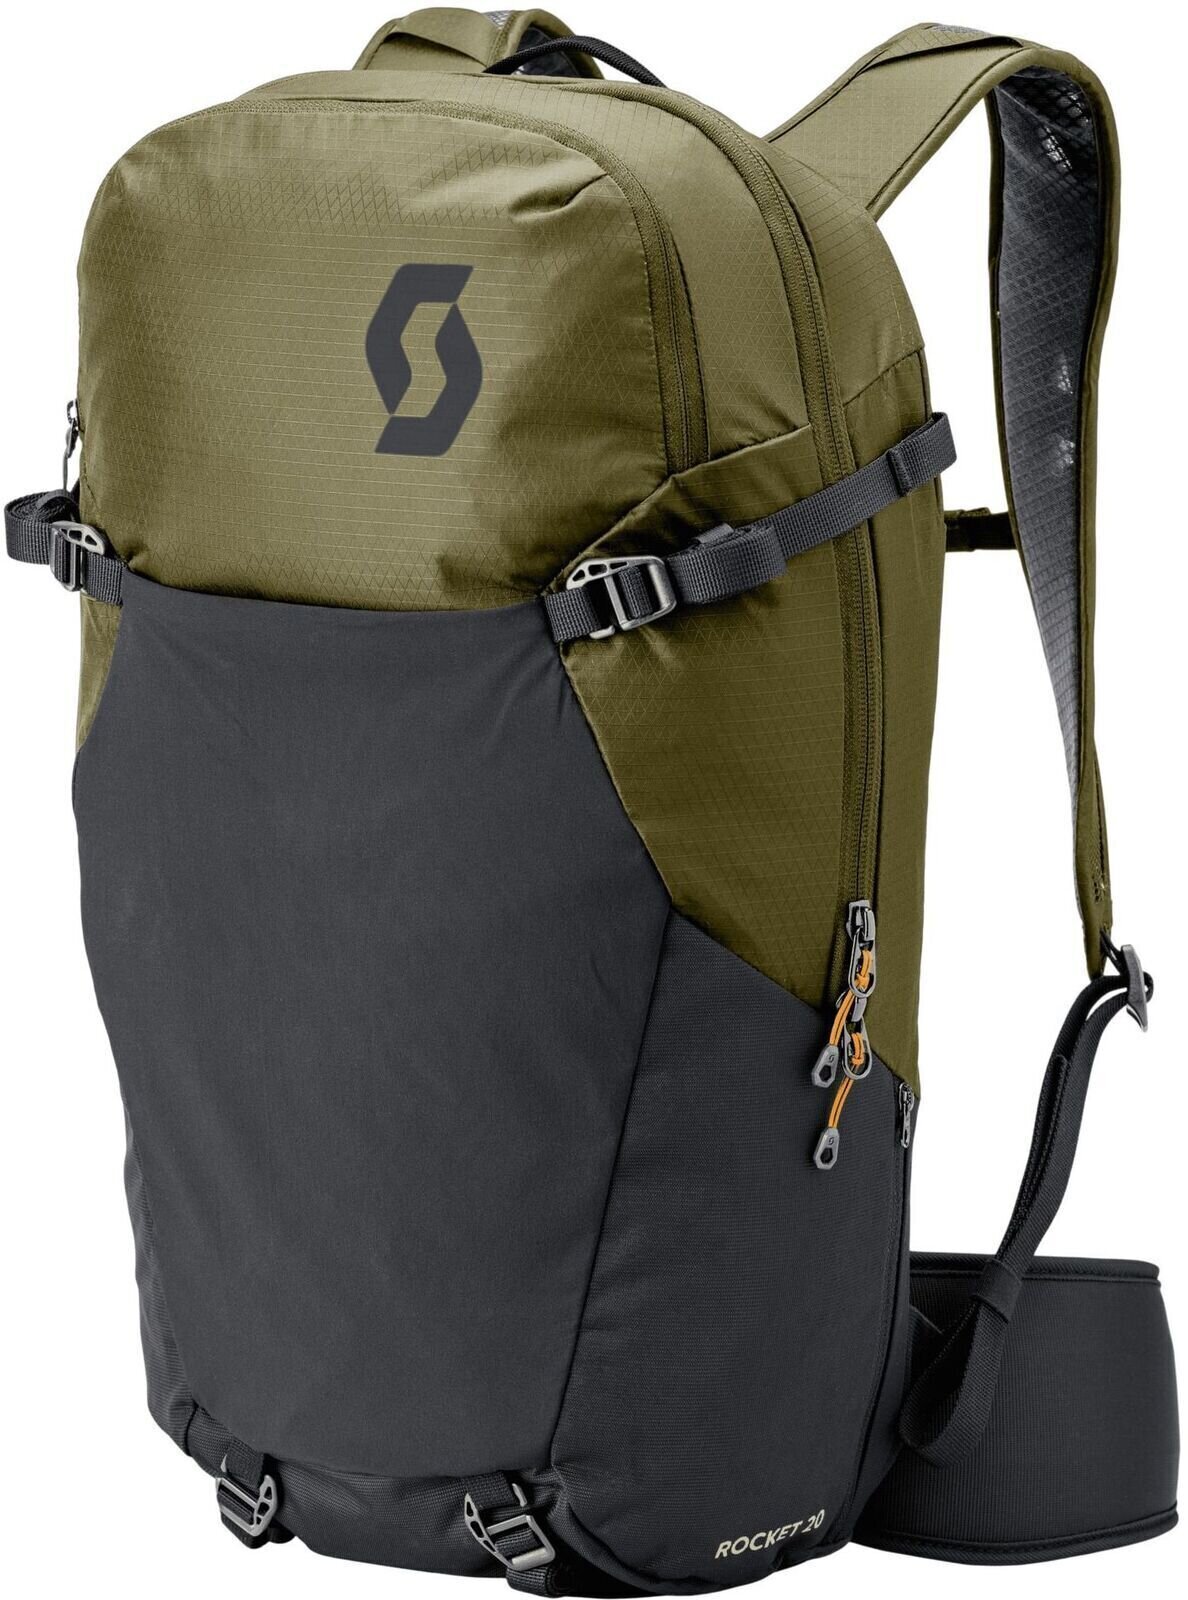 Cycling backpack and accessories Scott Trail Rocket 20 Backpack Green/Black Backpack